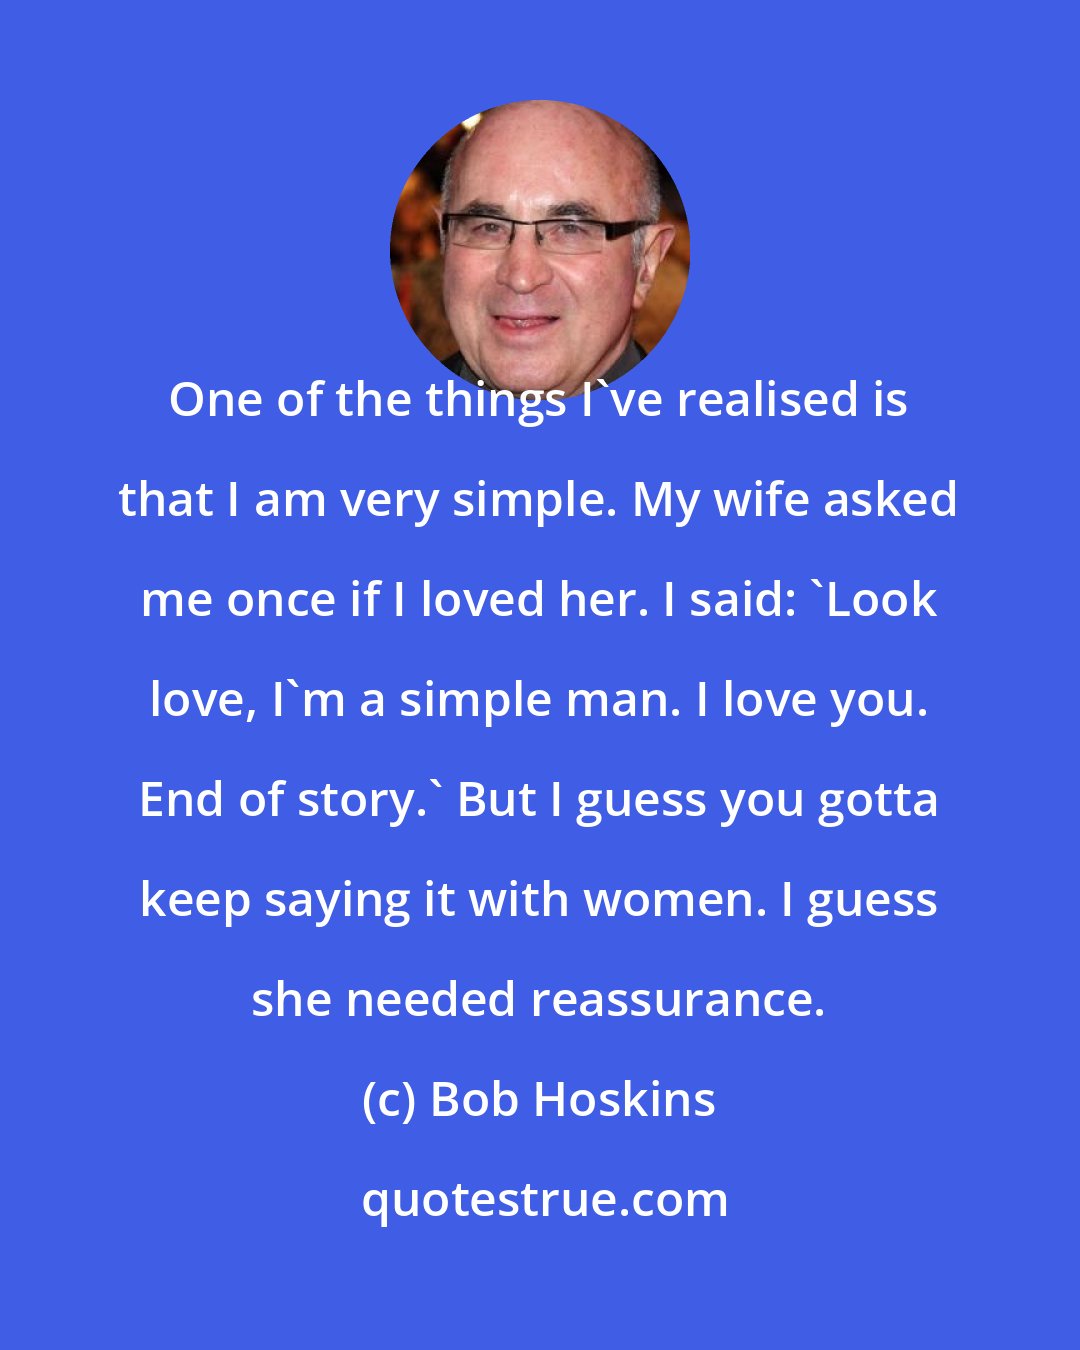 Bob Hoskins: One of the things I've realised is that I am very simple. My wife asked me once if I loved her. I said: 'Look love, I'm a simple man. I love you. End of story.' But I guess you gotta keep saying it with women. I guess she needed reassurance.